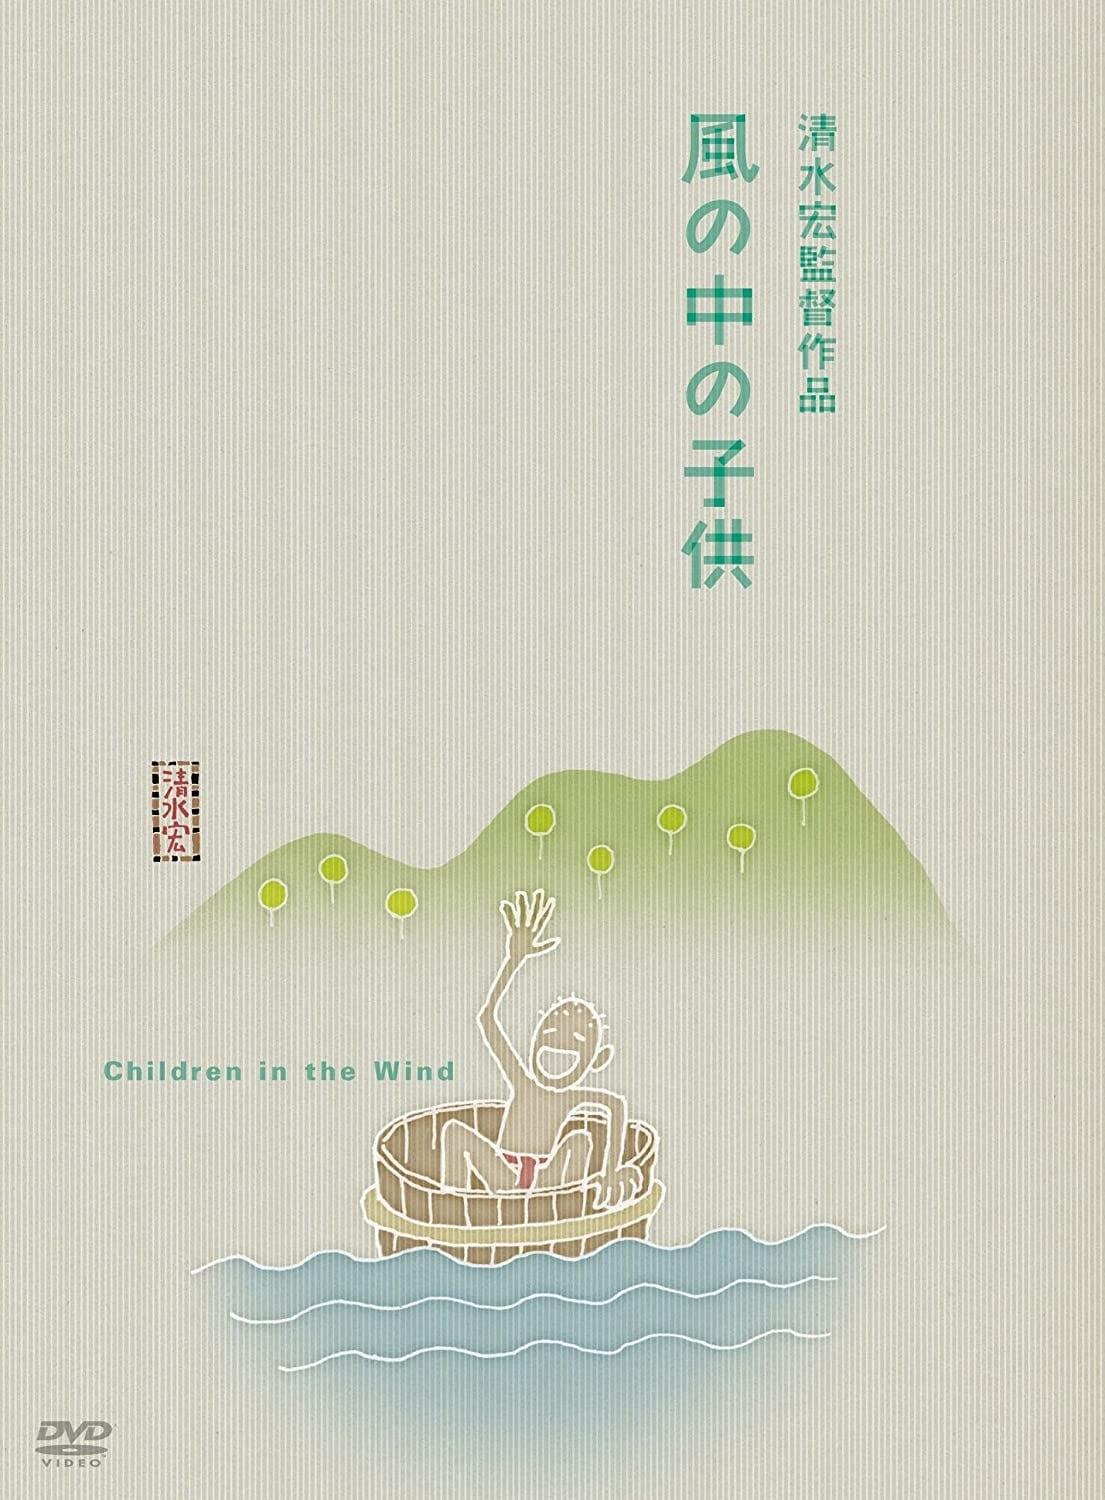 Children in the Wind poster